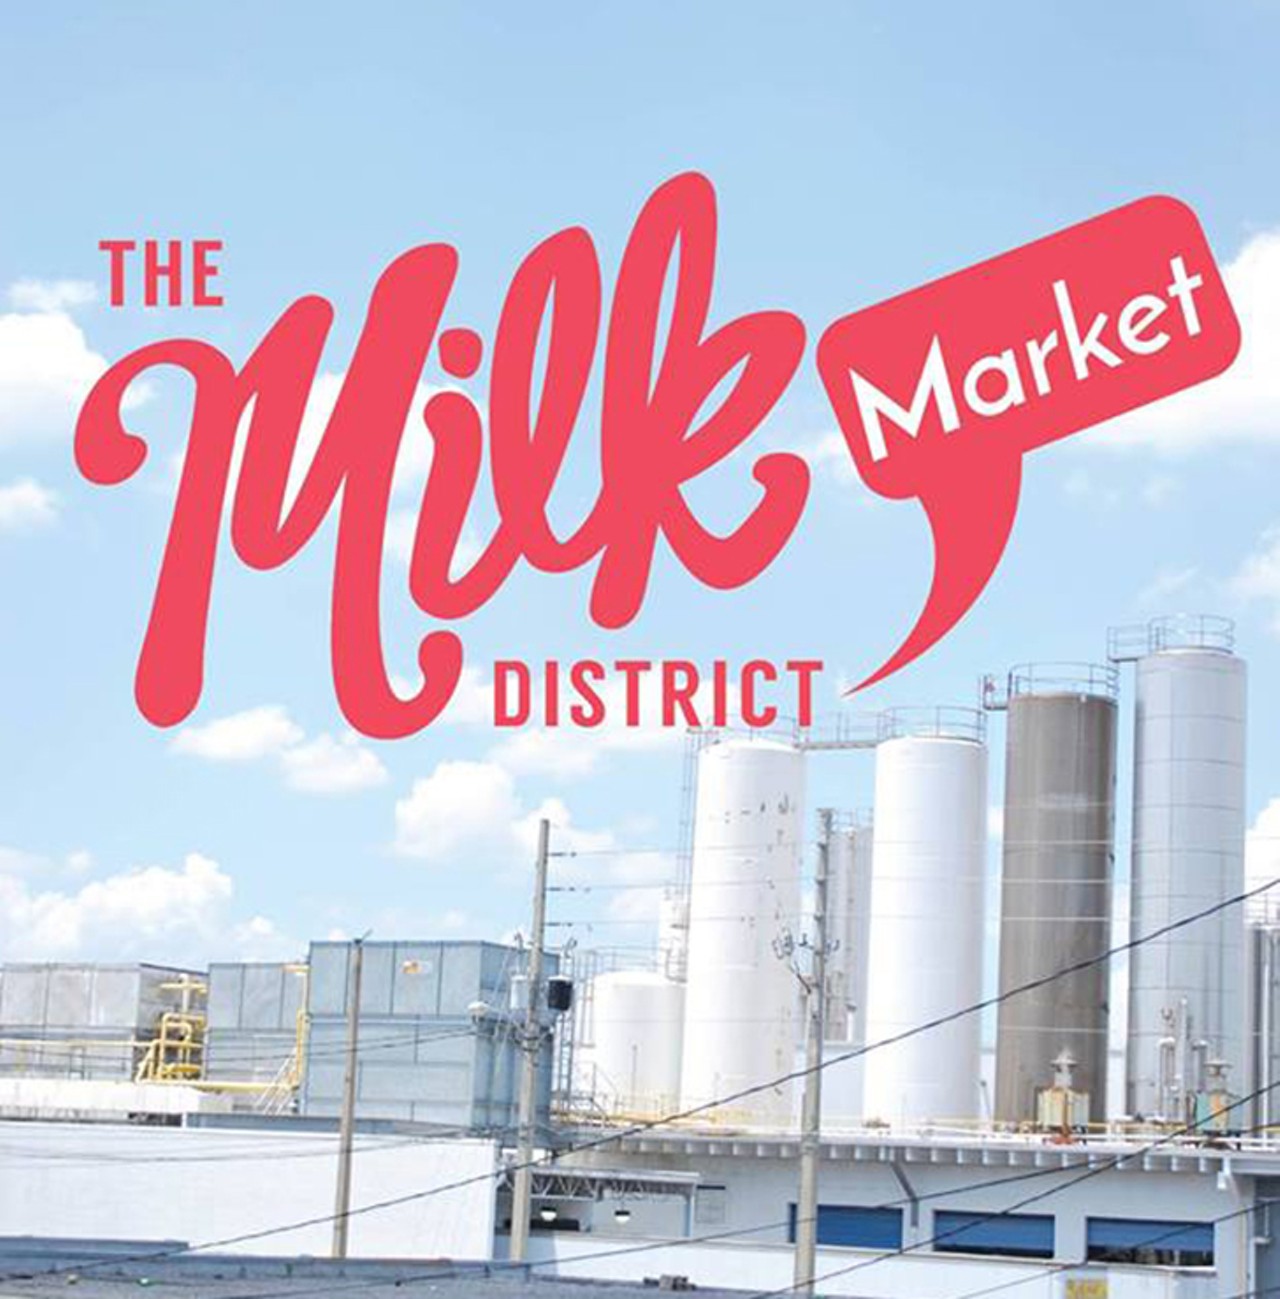 Sunday, May 29Milk District Market in the Milk District